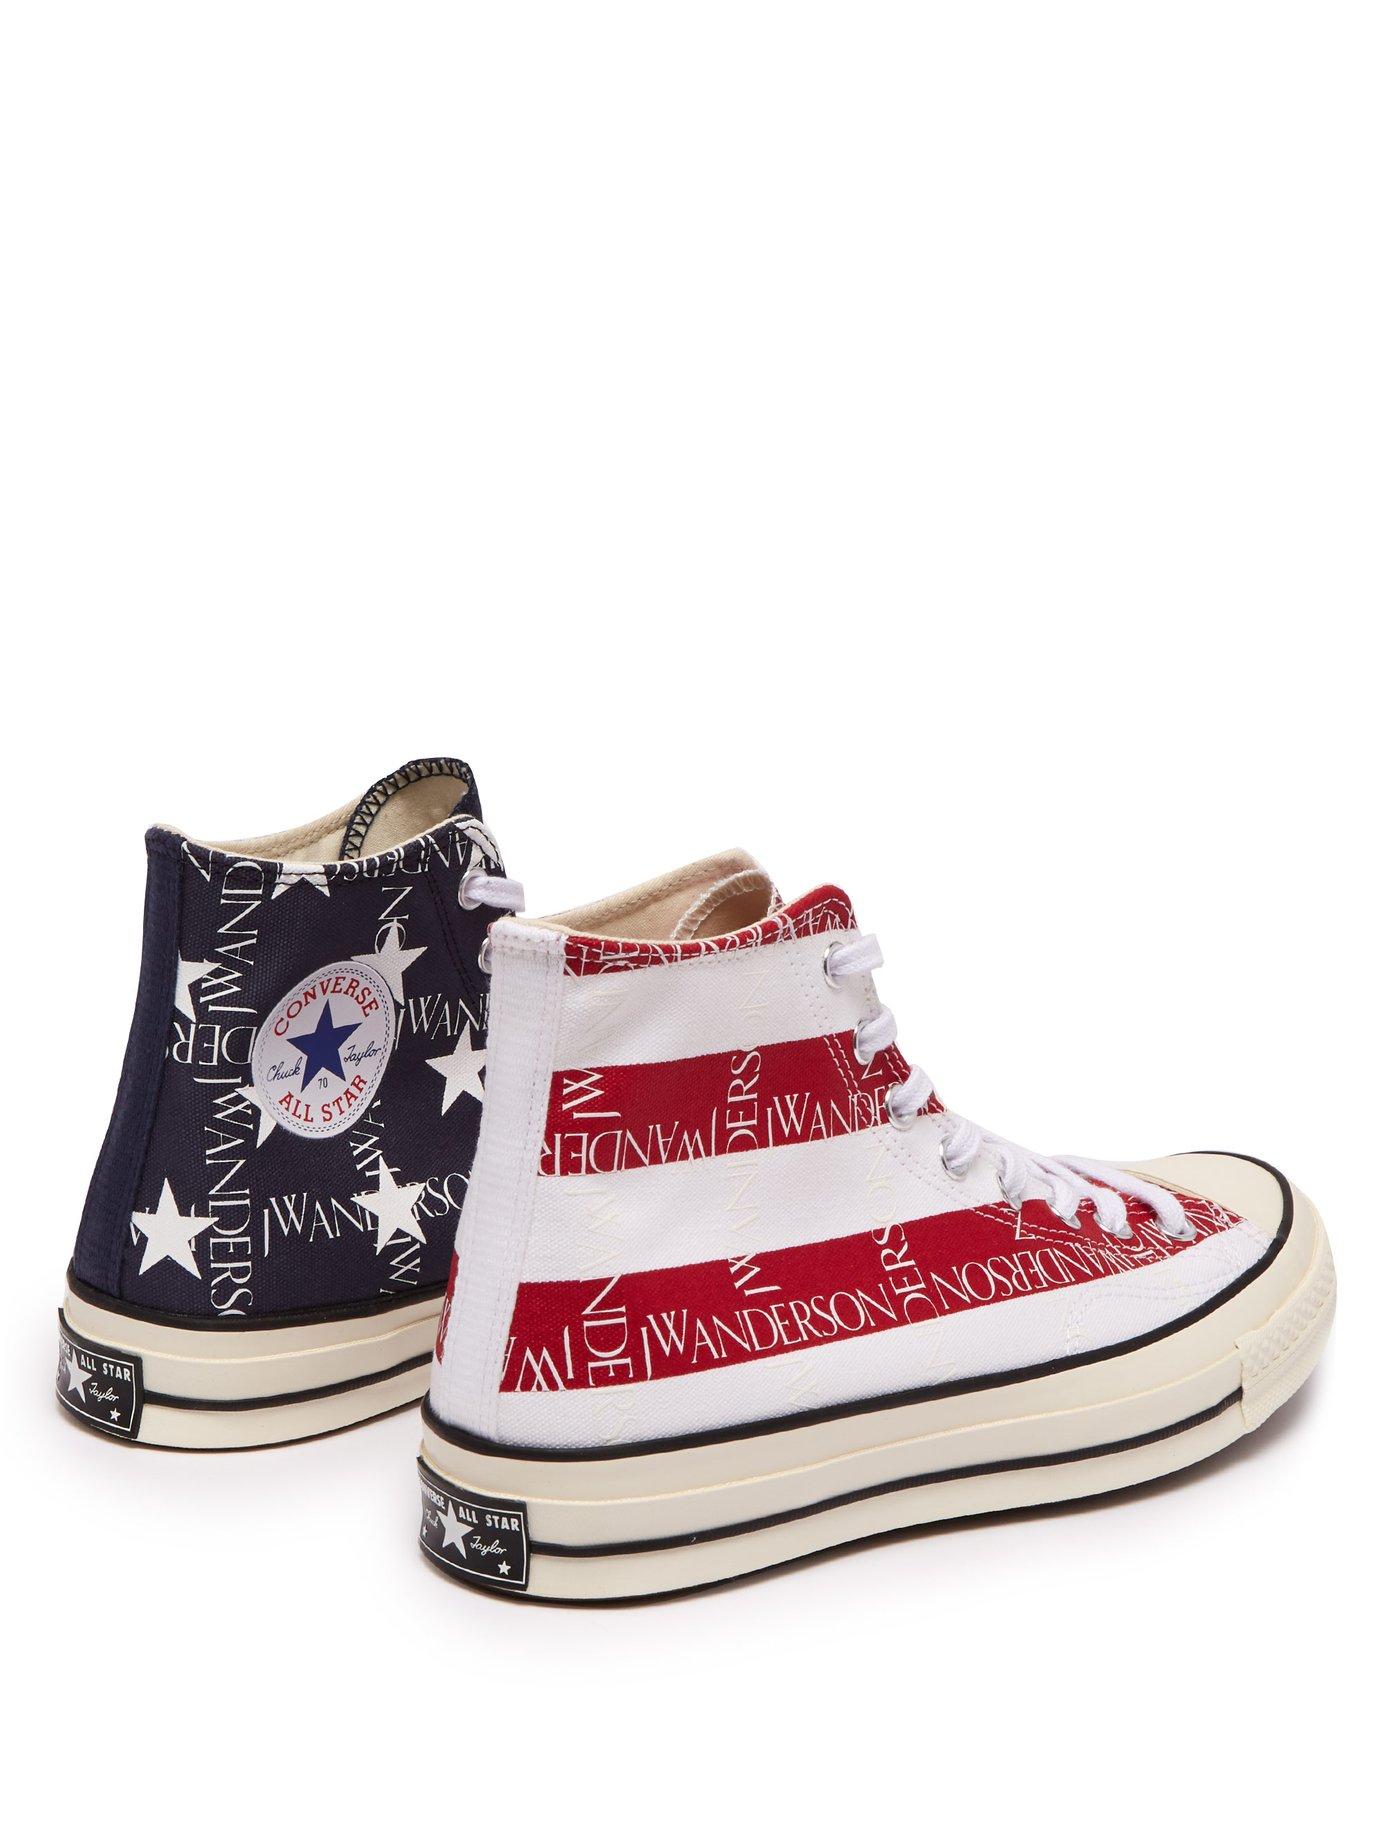 converse stars and stripes